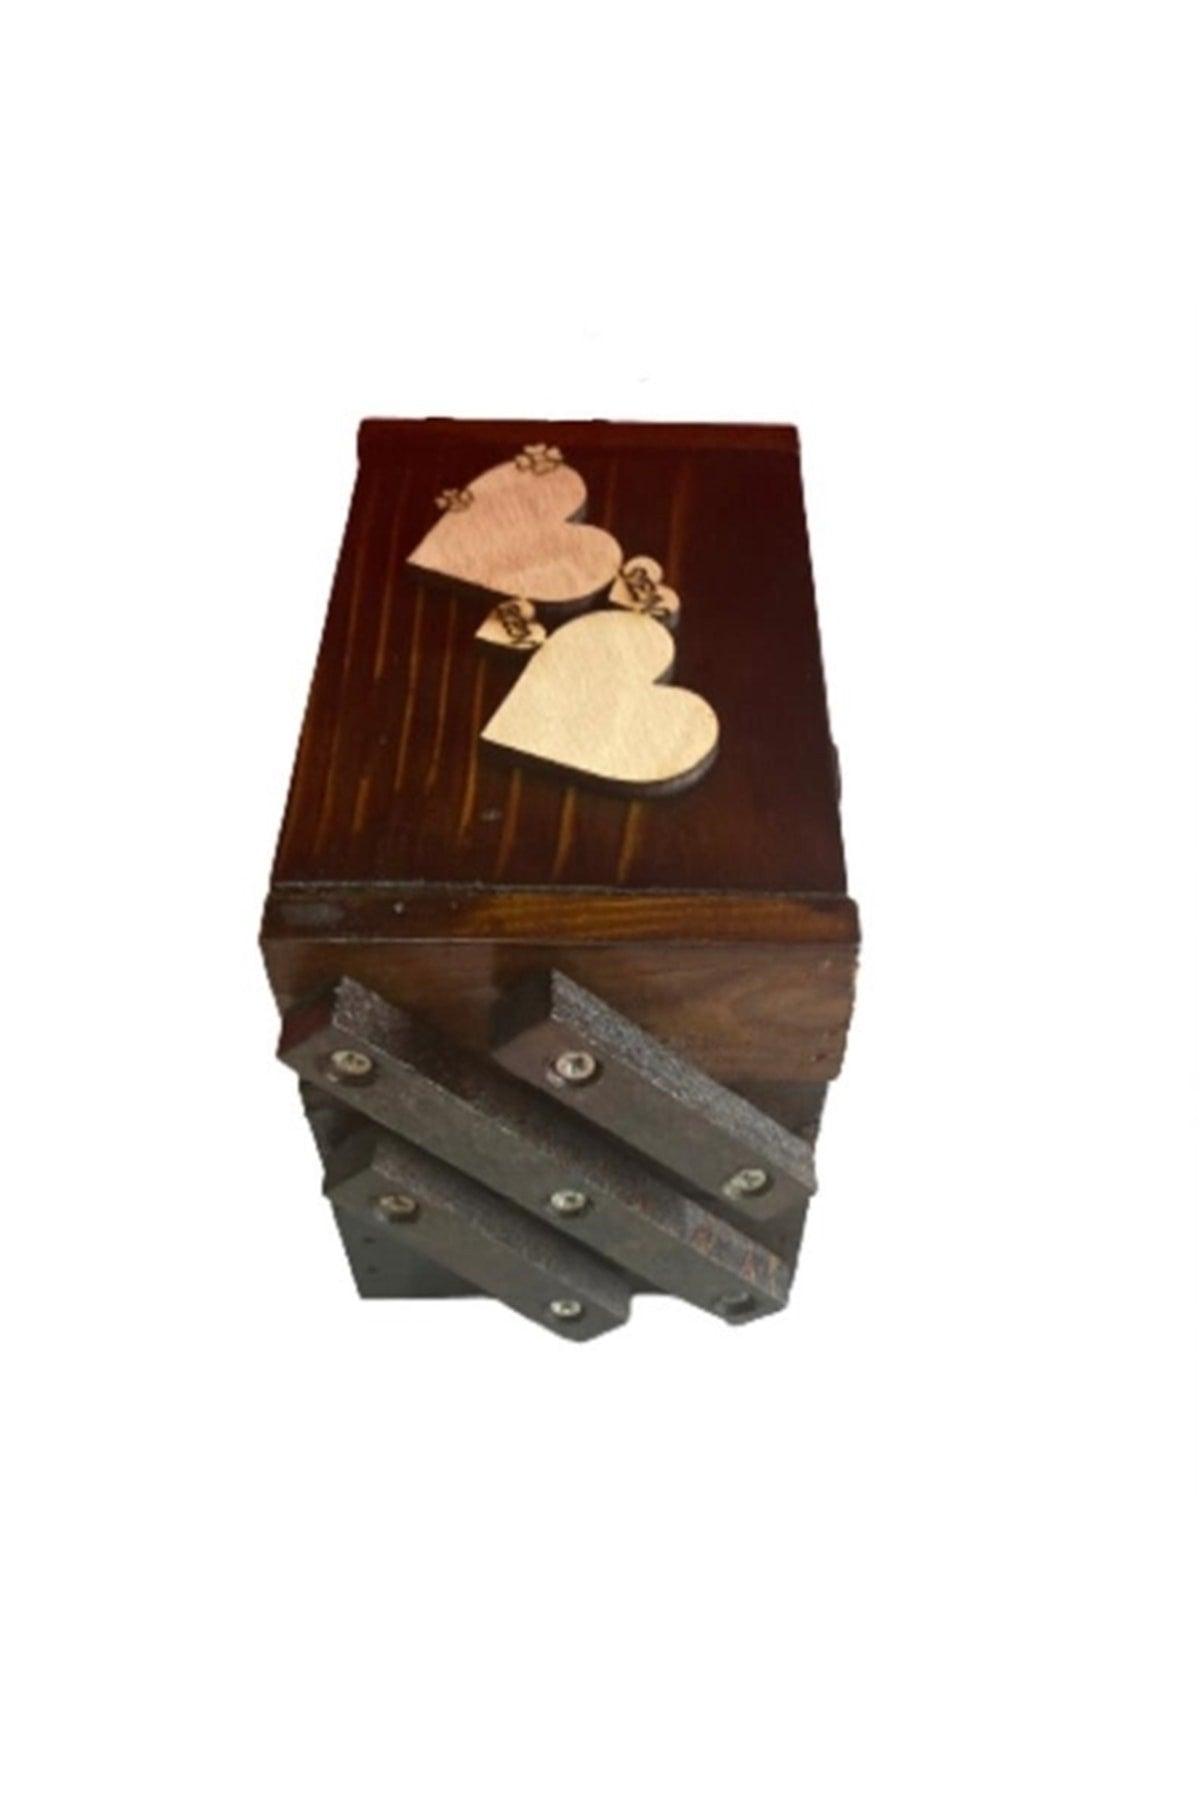 Decorative Sewing And Accessory Box 3-Tier Jewelry Box Small Size - Swordslife